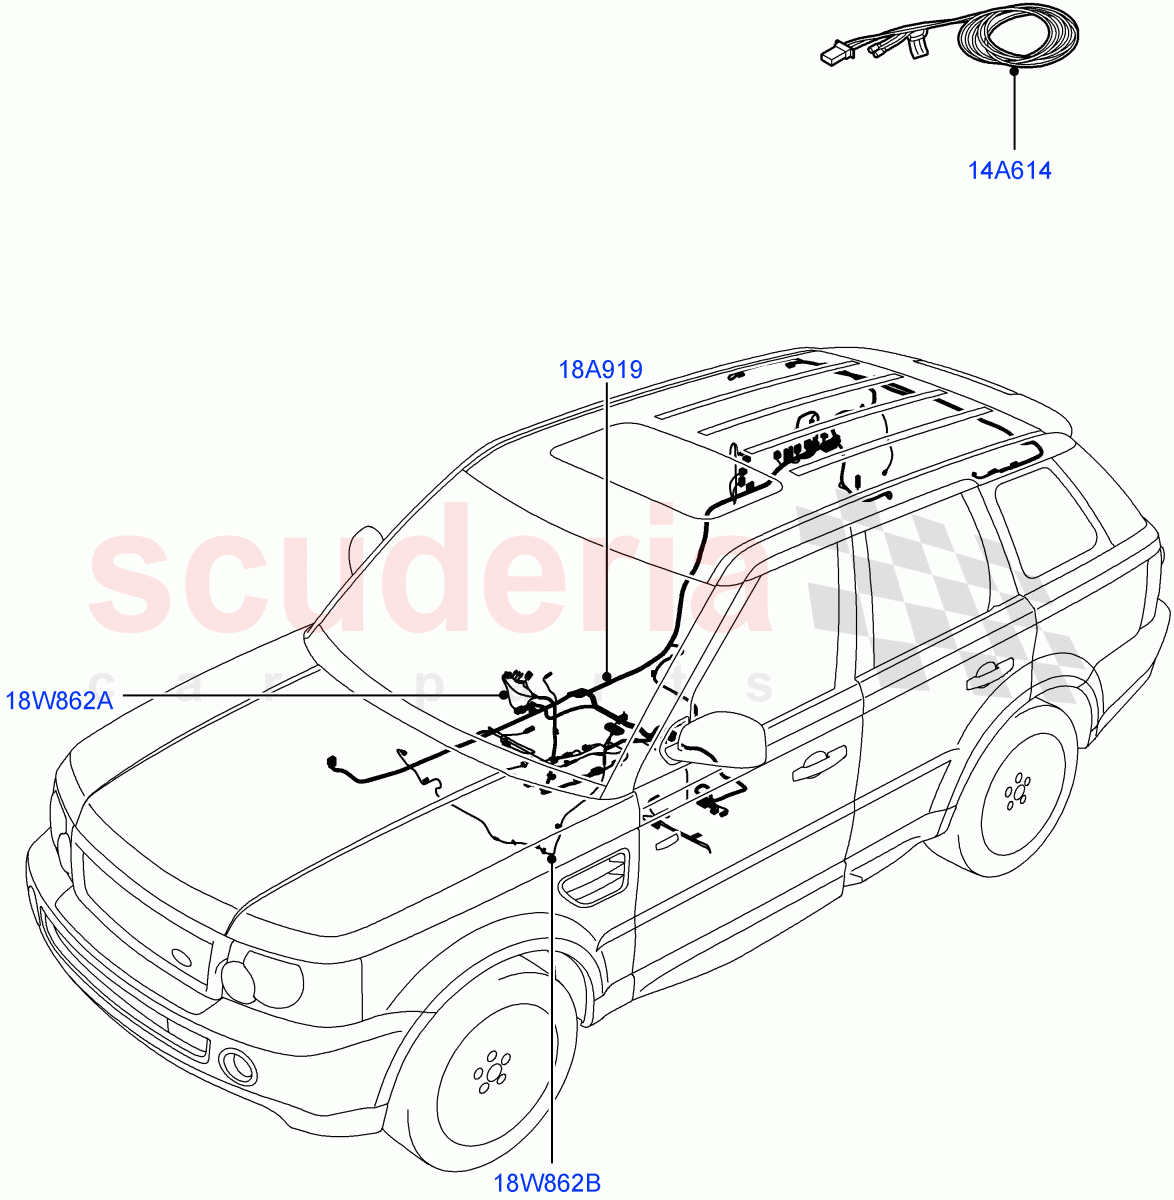 Electrical Wiring - Body And Rear(Audio/Navigation/Entertainment)((V)TO8A999999) of Land Rover Land Rover Range Rover Sport (2005-2009) [4.4 AJ Petrol V8]